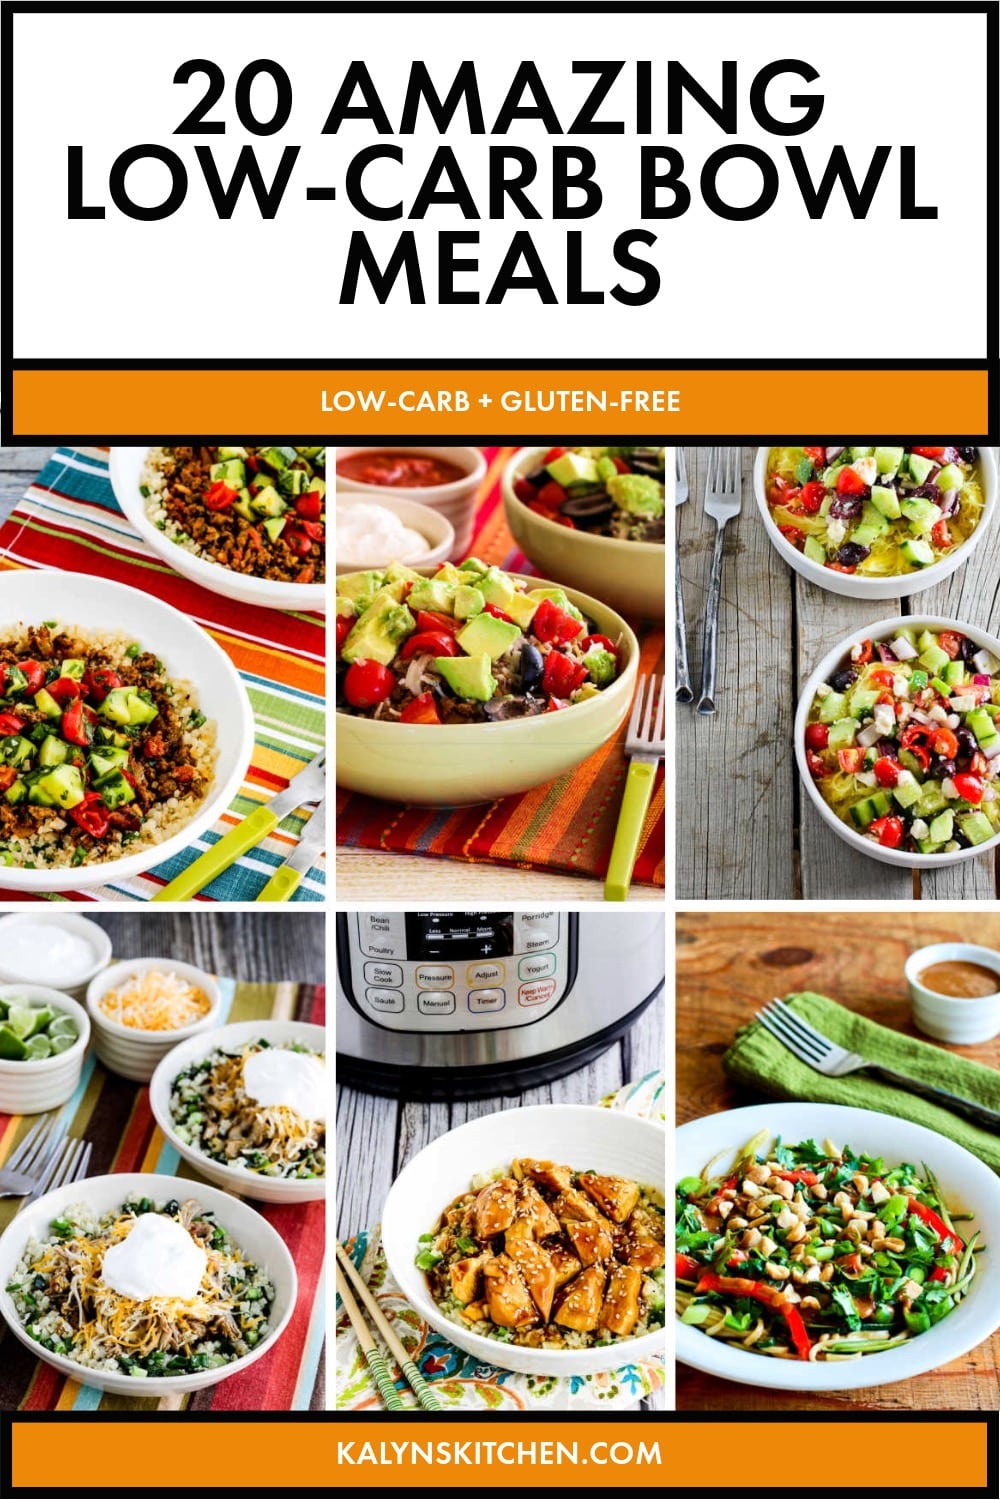 Pinterest image of 20 Amazing Low-Carb Bowl Meals